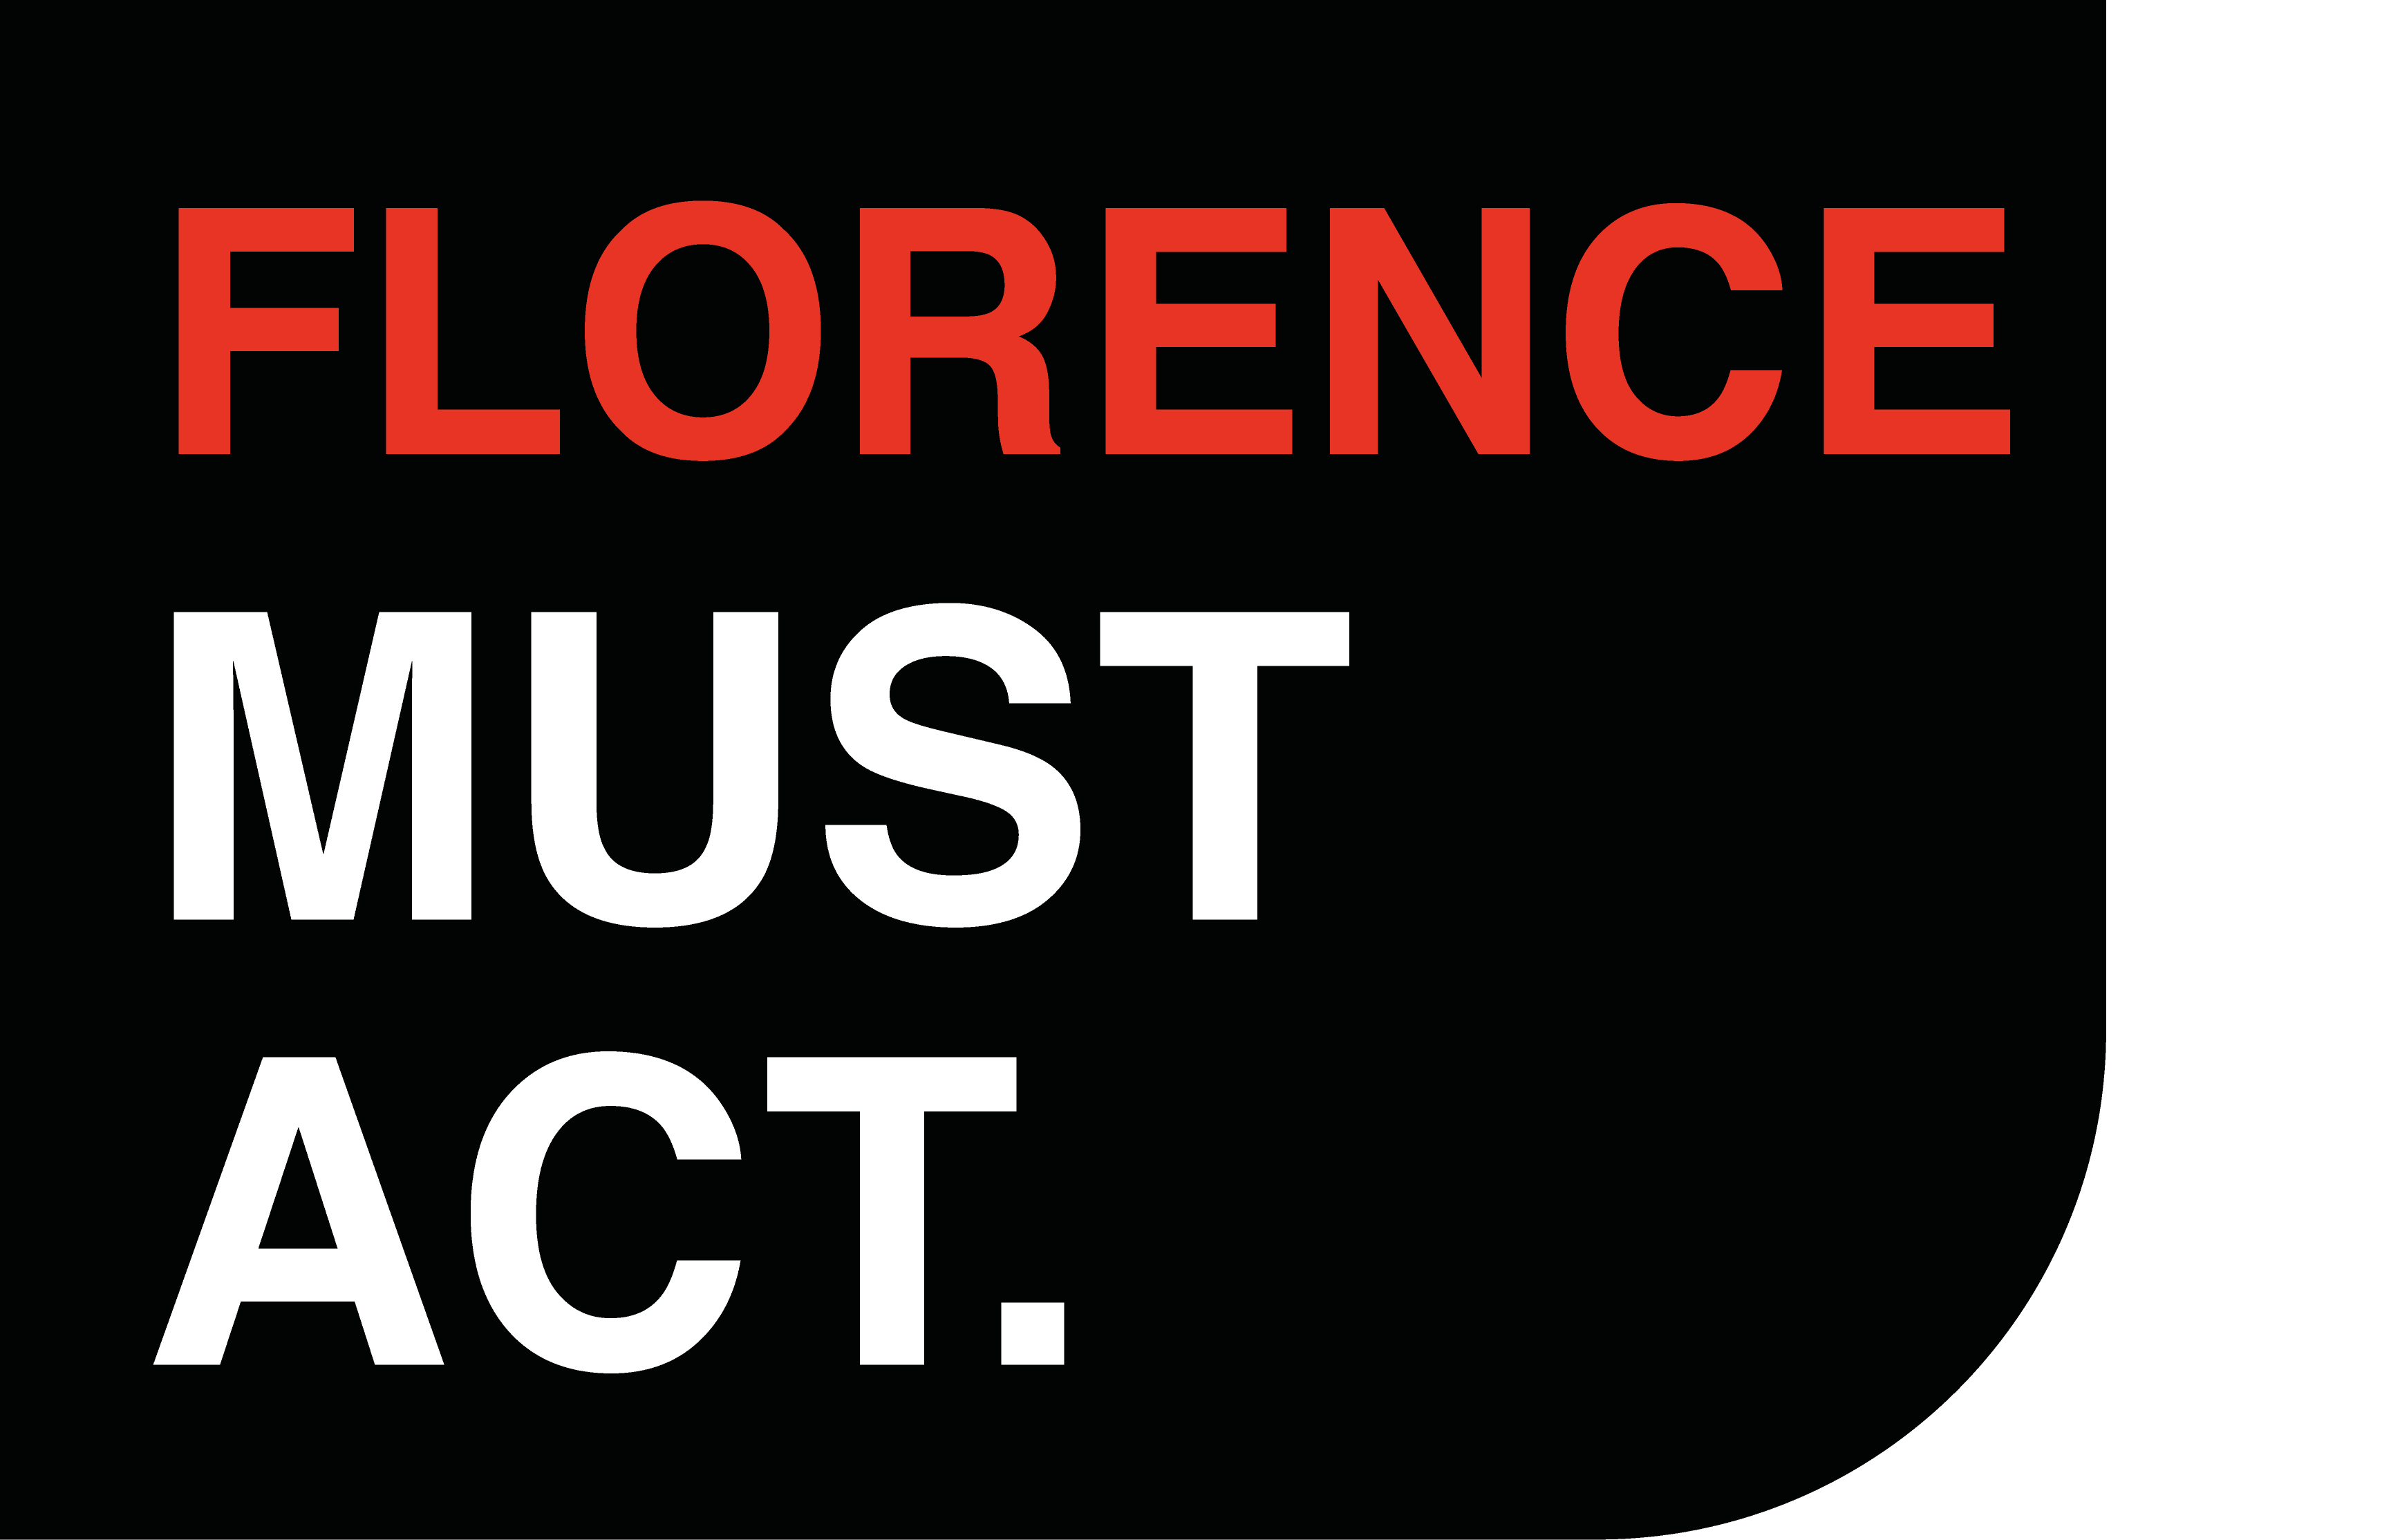 Florence Must Act